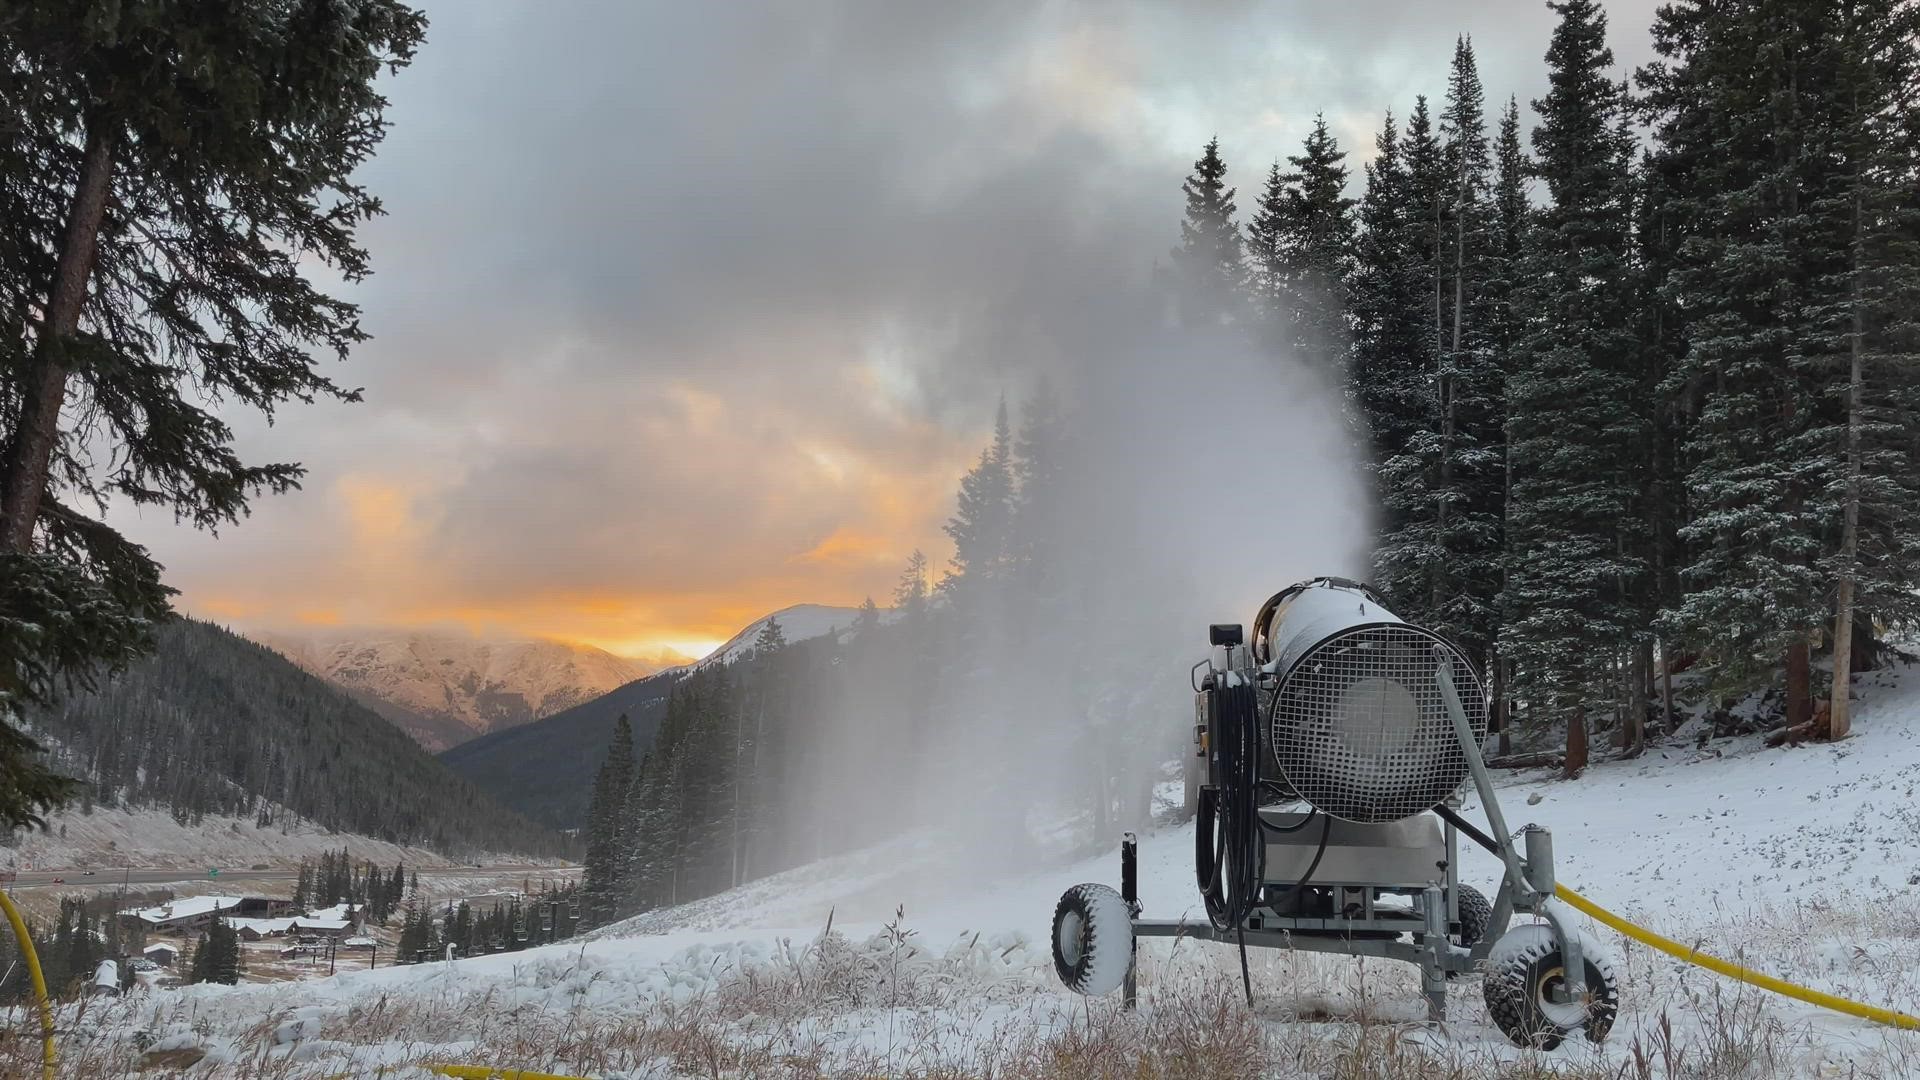 Snowmaking has begun at Loveland Ski Area in Colorado for the 2021-22 season. It typically takes about two weeks for Loveland’s snowmakers to prepare for opening.